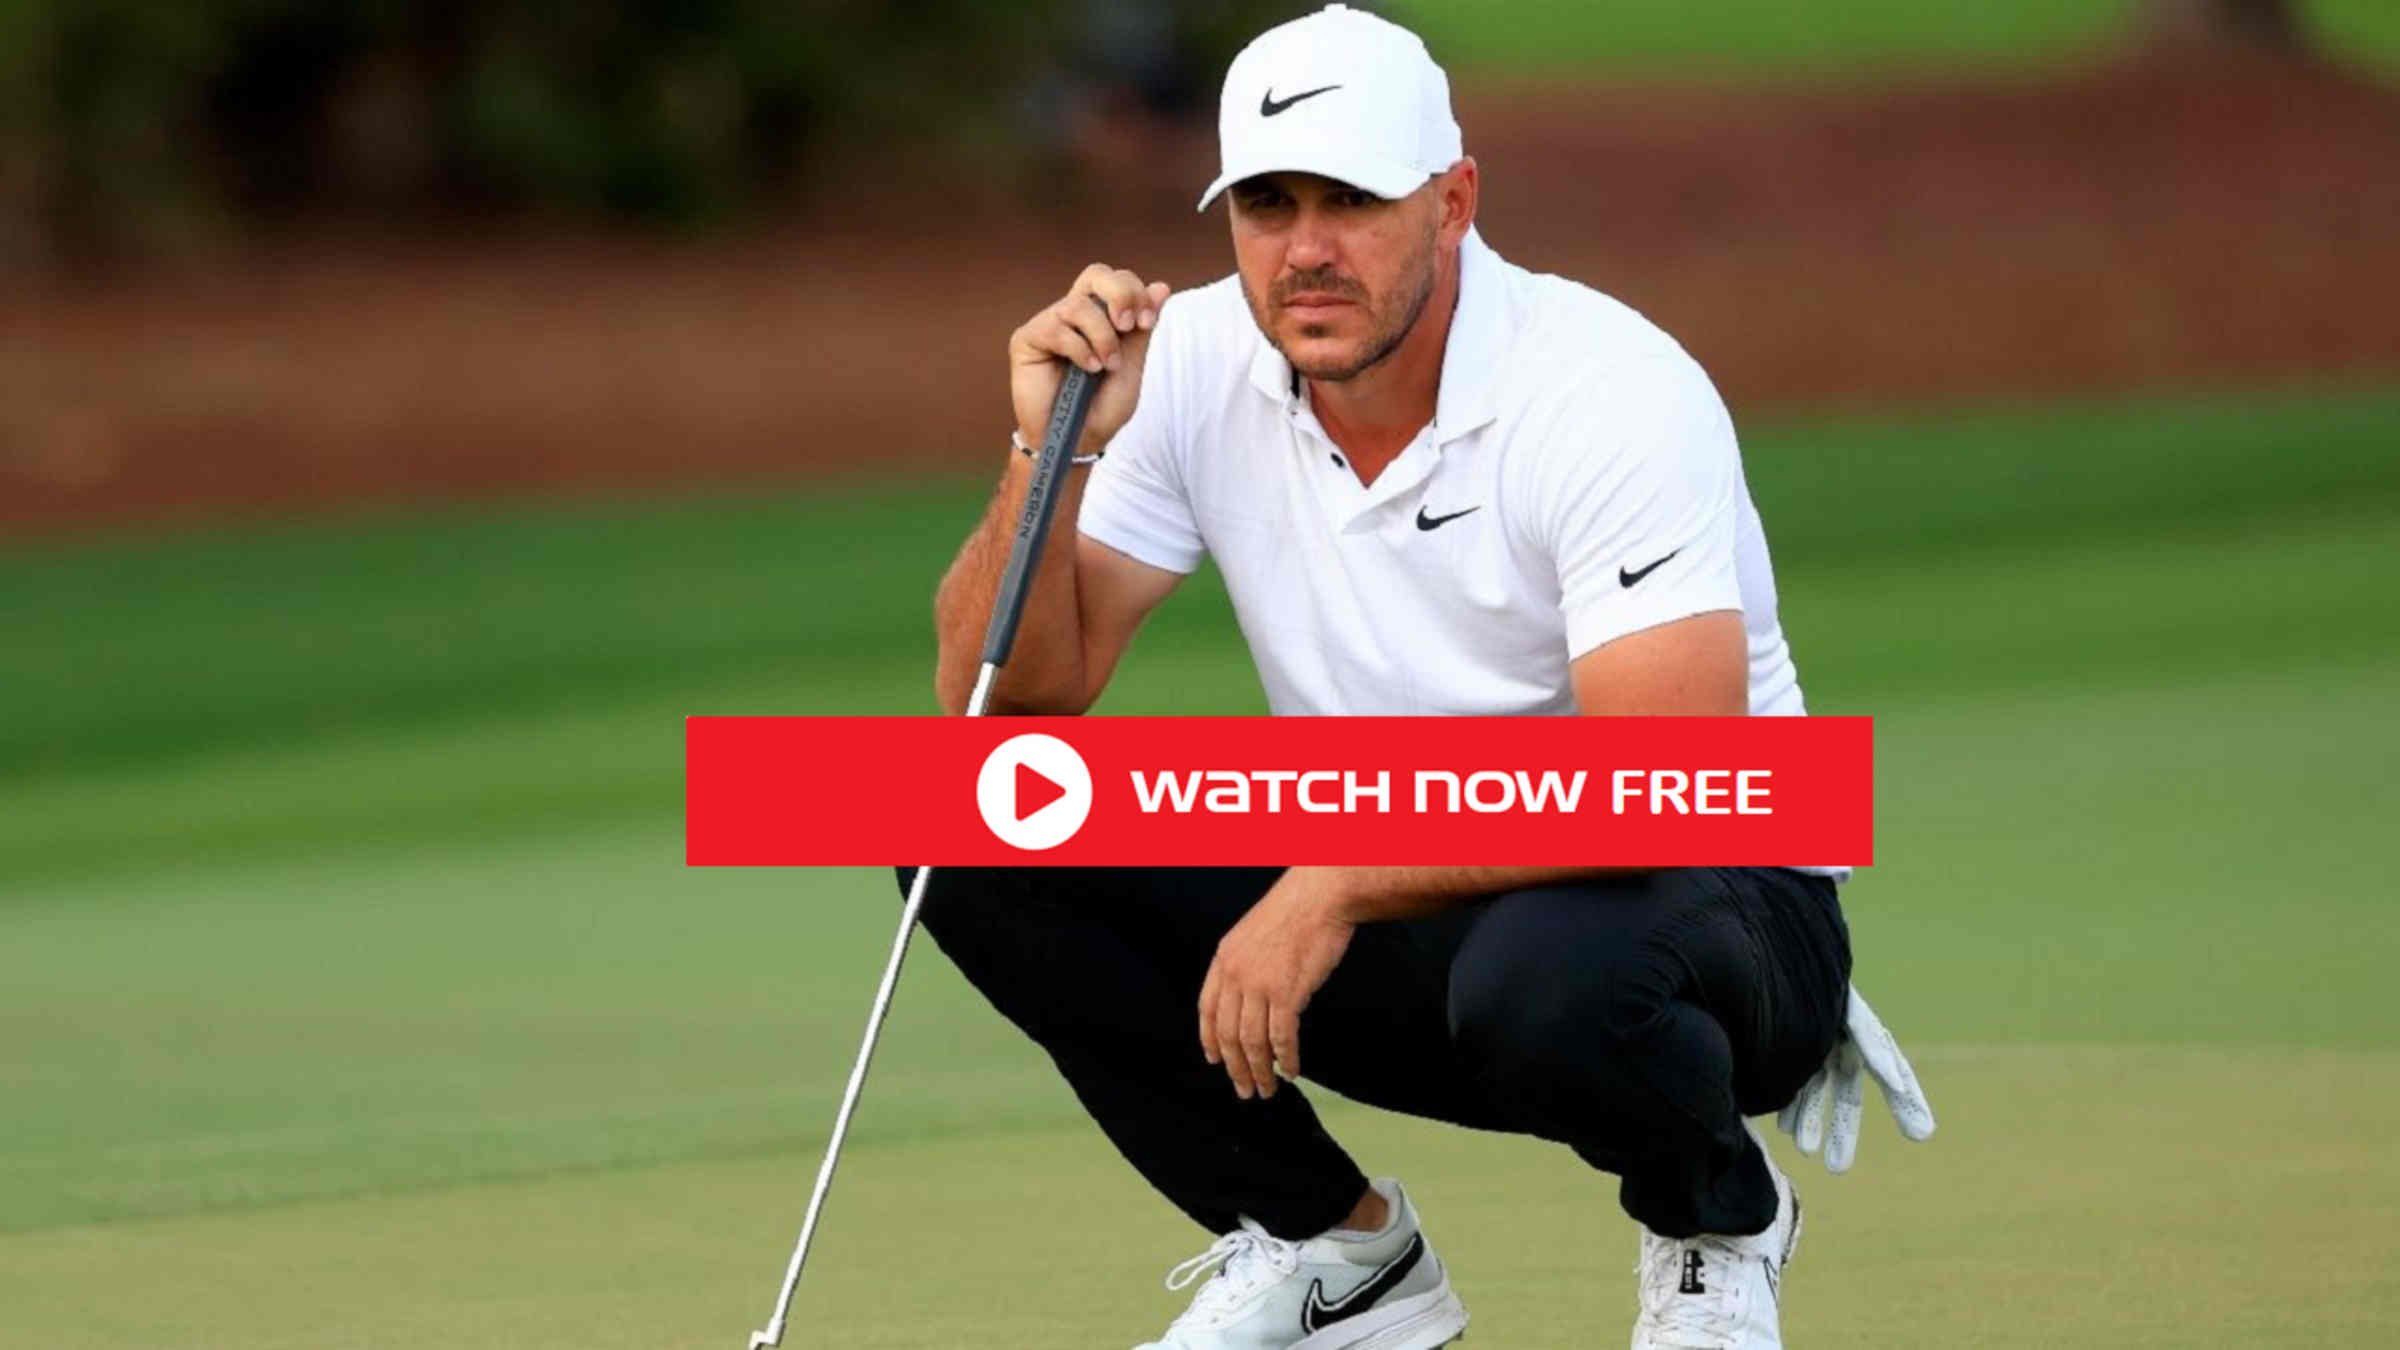 ‘The Players 2022’ live streaming: Watch golf Championship free at home